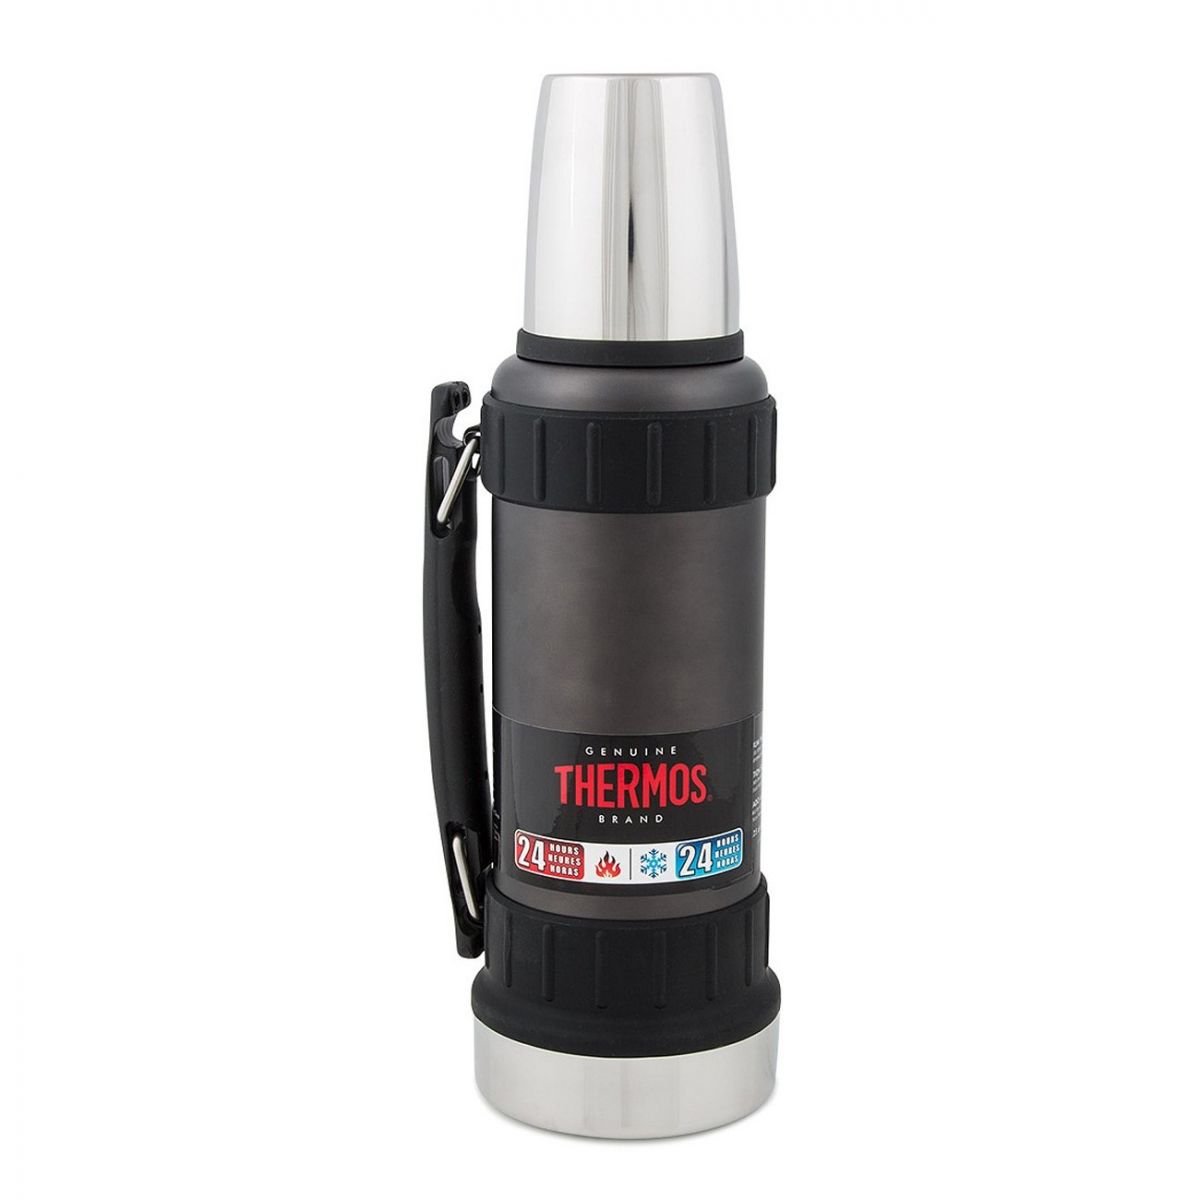 Thermos Termo 1.2 LT Acero Work Series 24HS